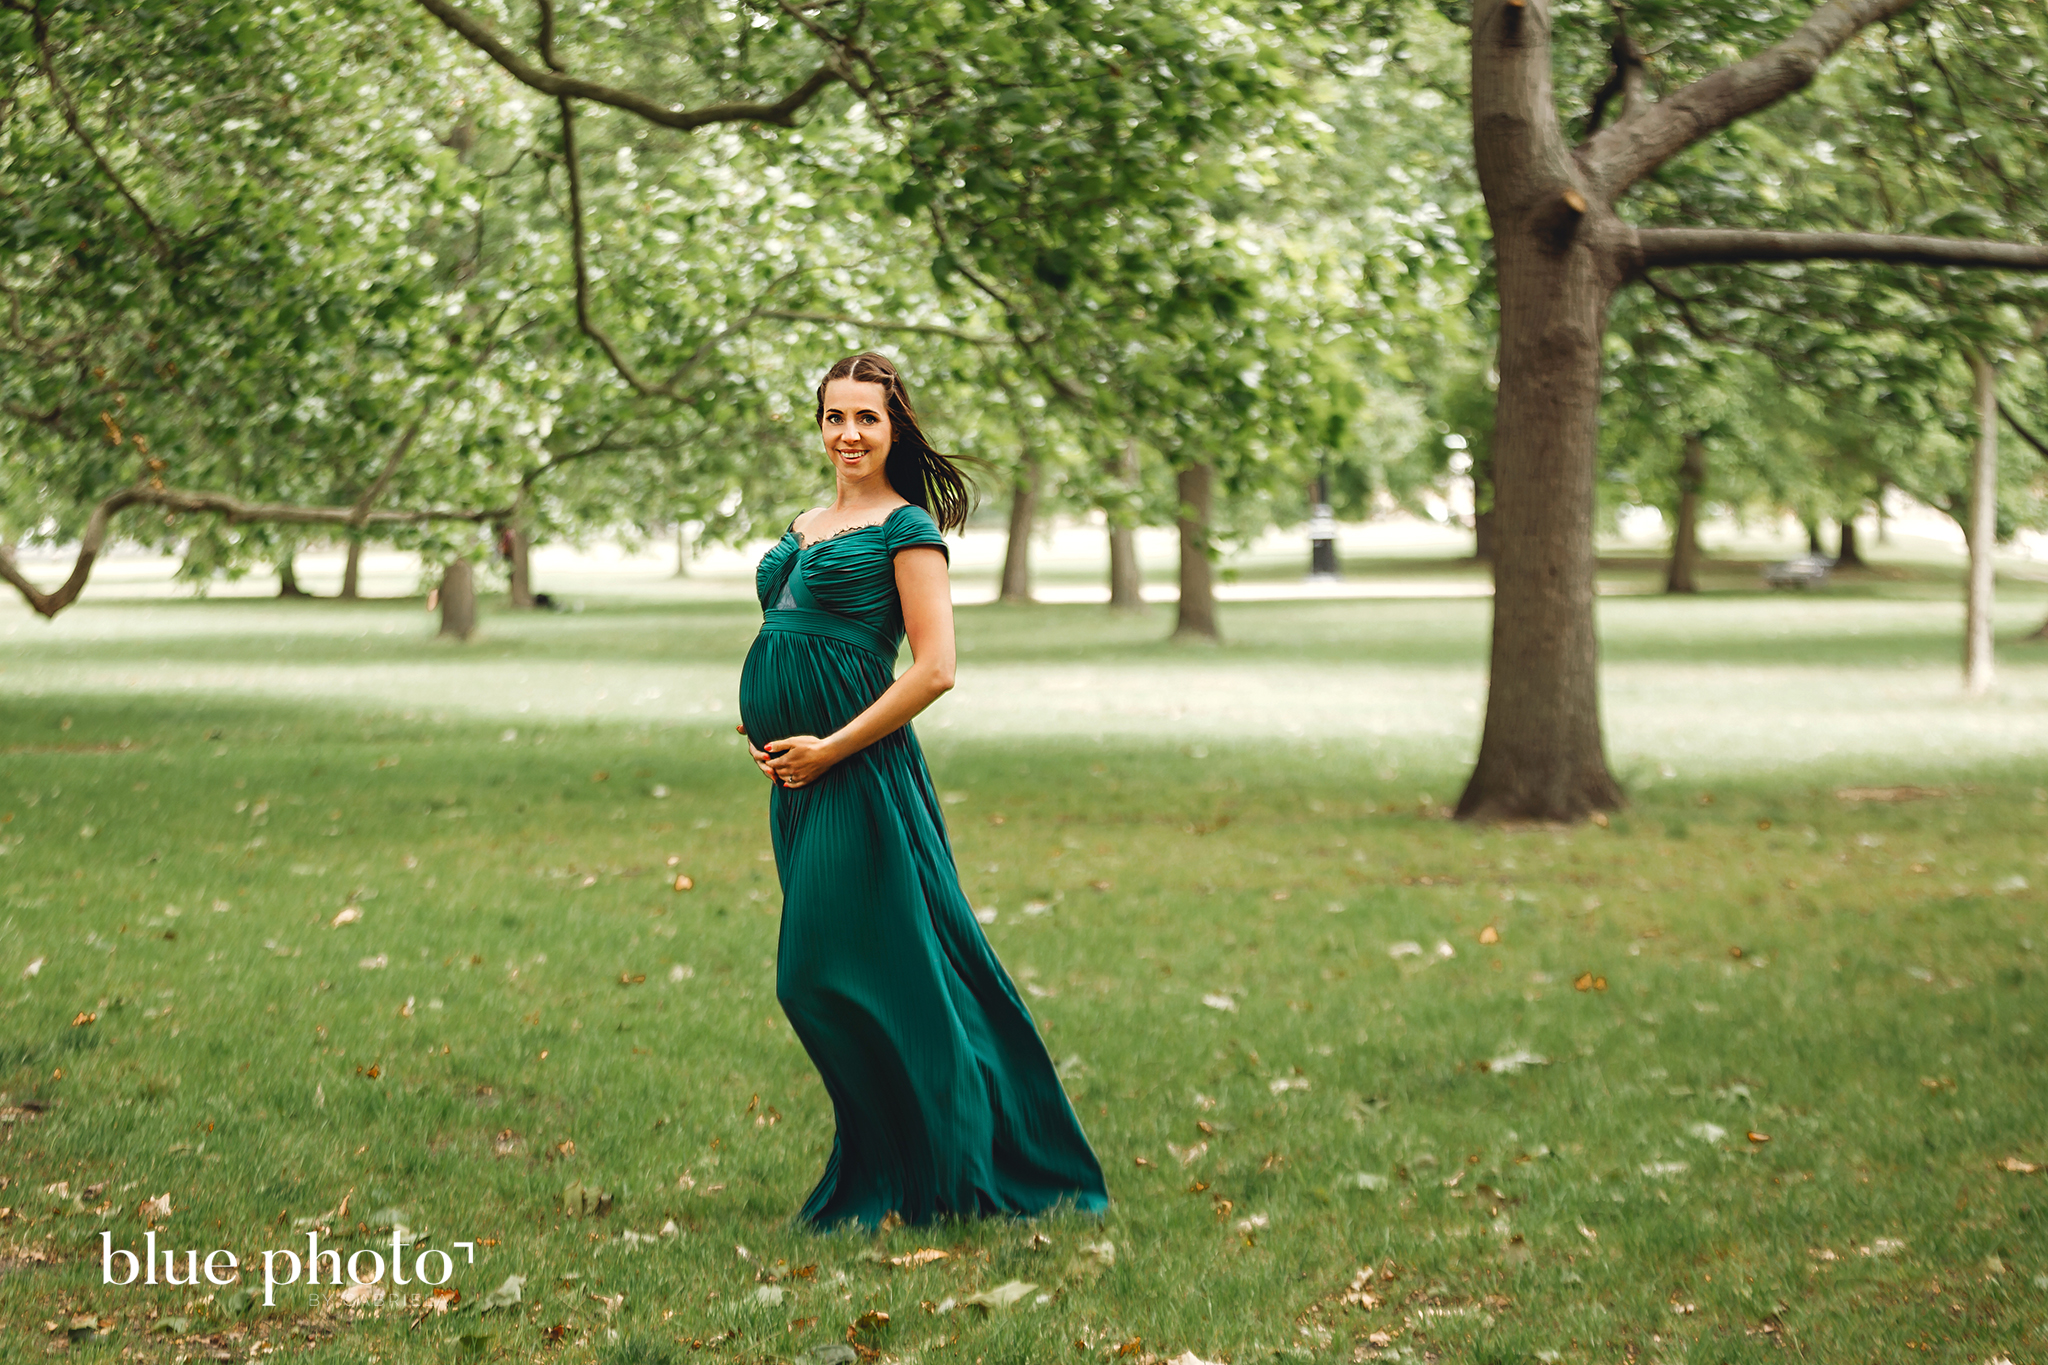 Joanna and her maternity session in Central London, at Buckingham Palace